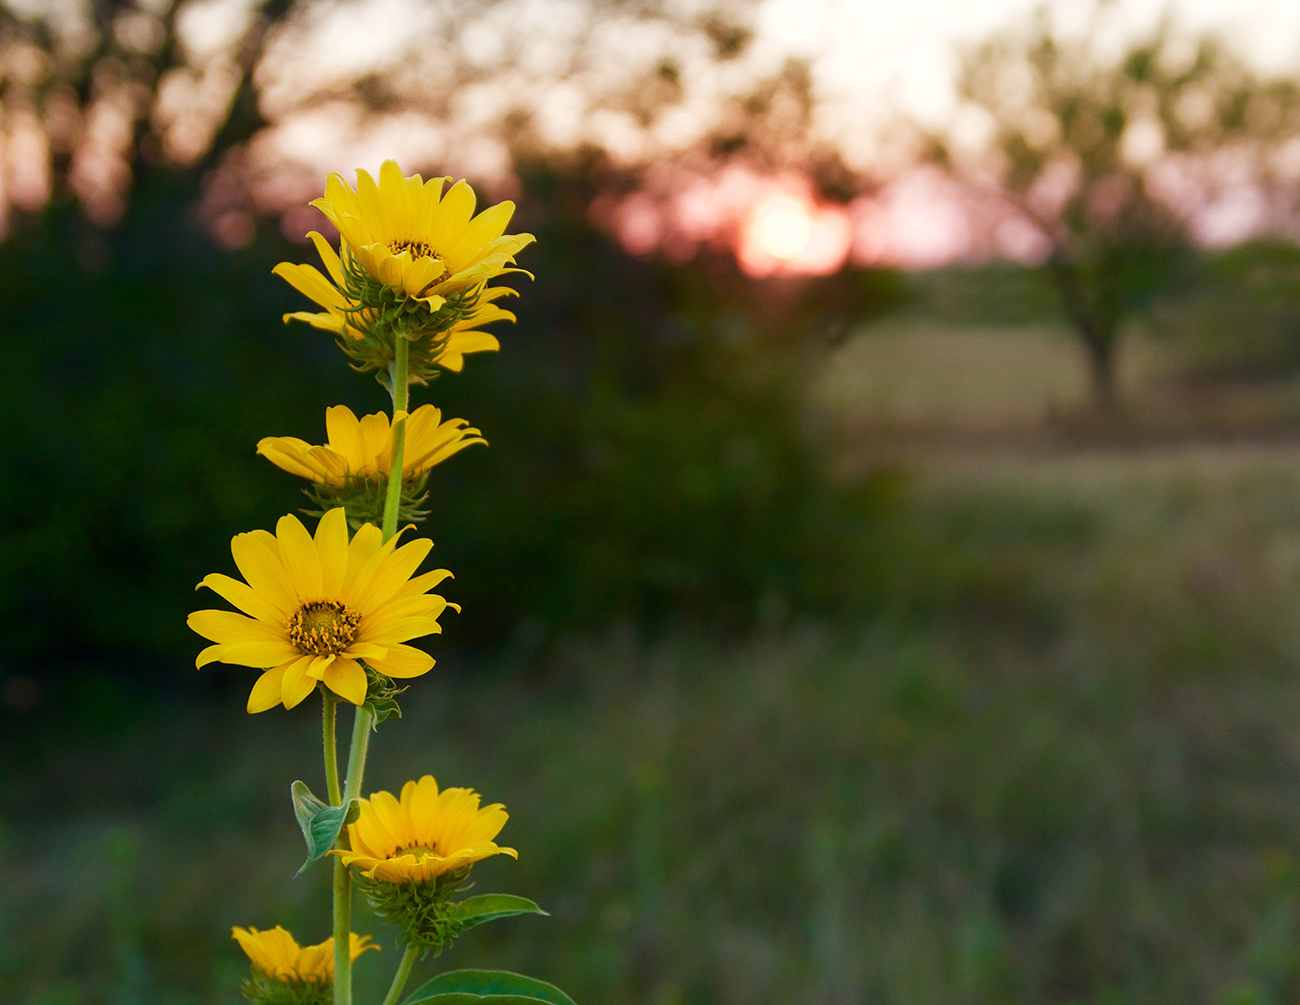 Image of sunflowers at sunset